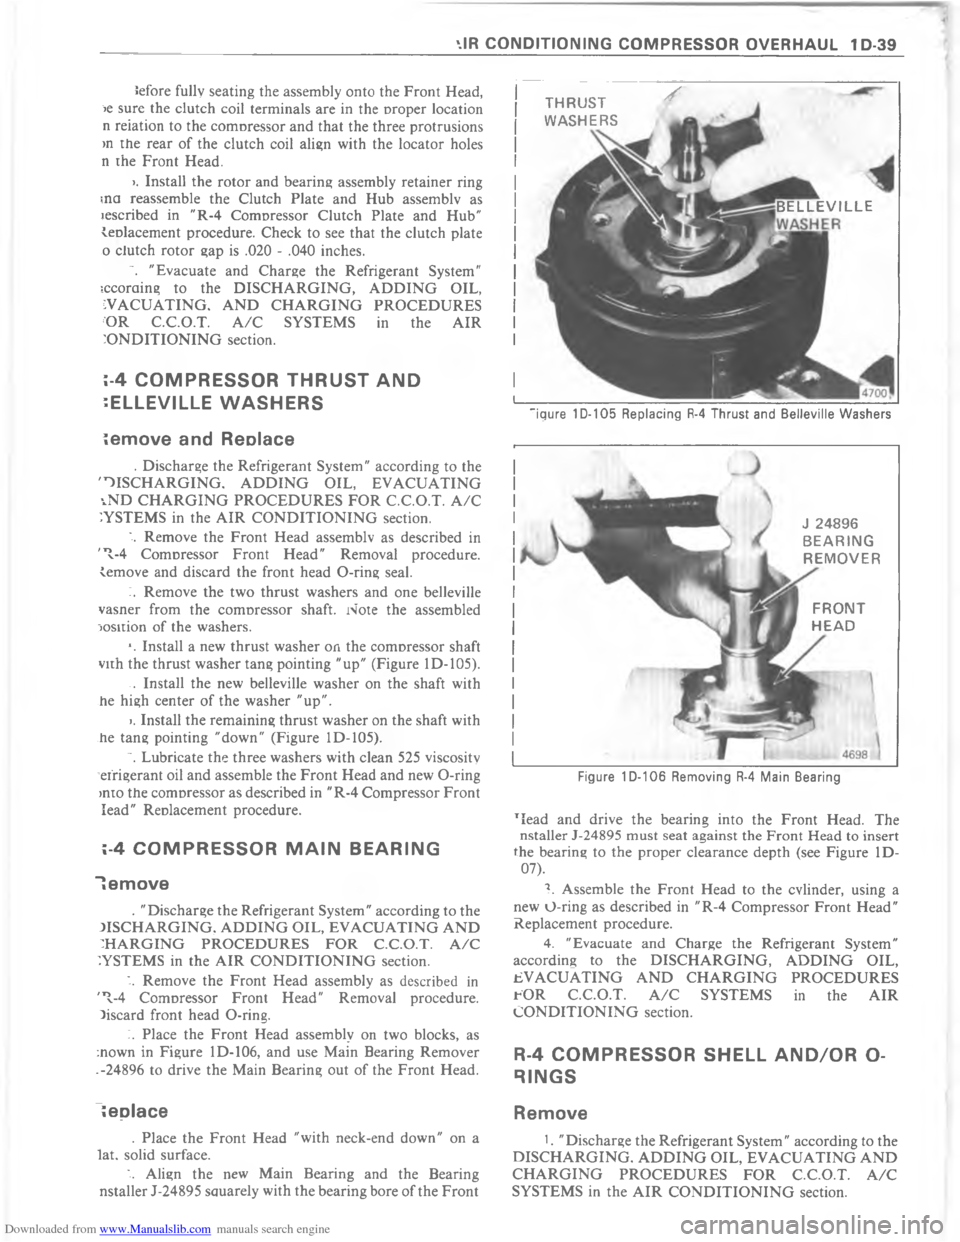 CHEVROLET IMPALA 1980 6.G Service Manual Downloaded from www.Manualslib.com manuals search engine  	      9        	                (    0 

	

